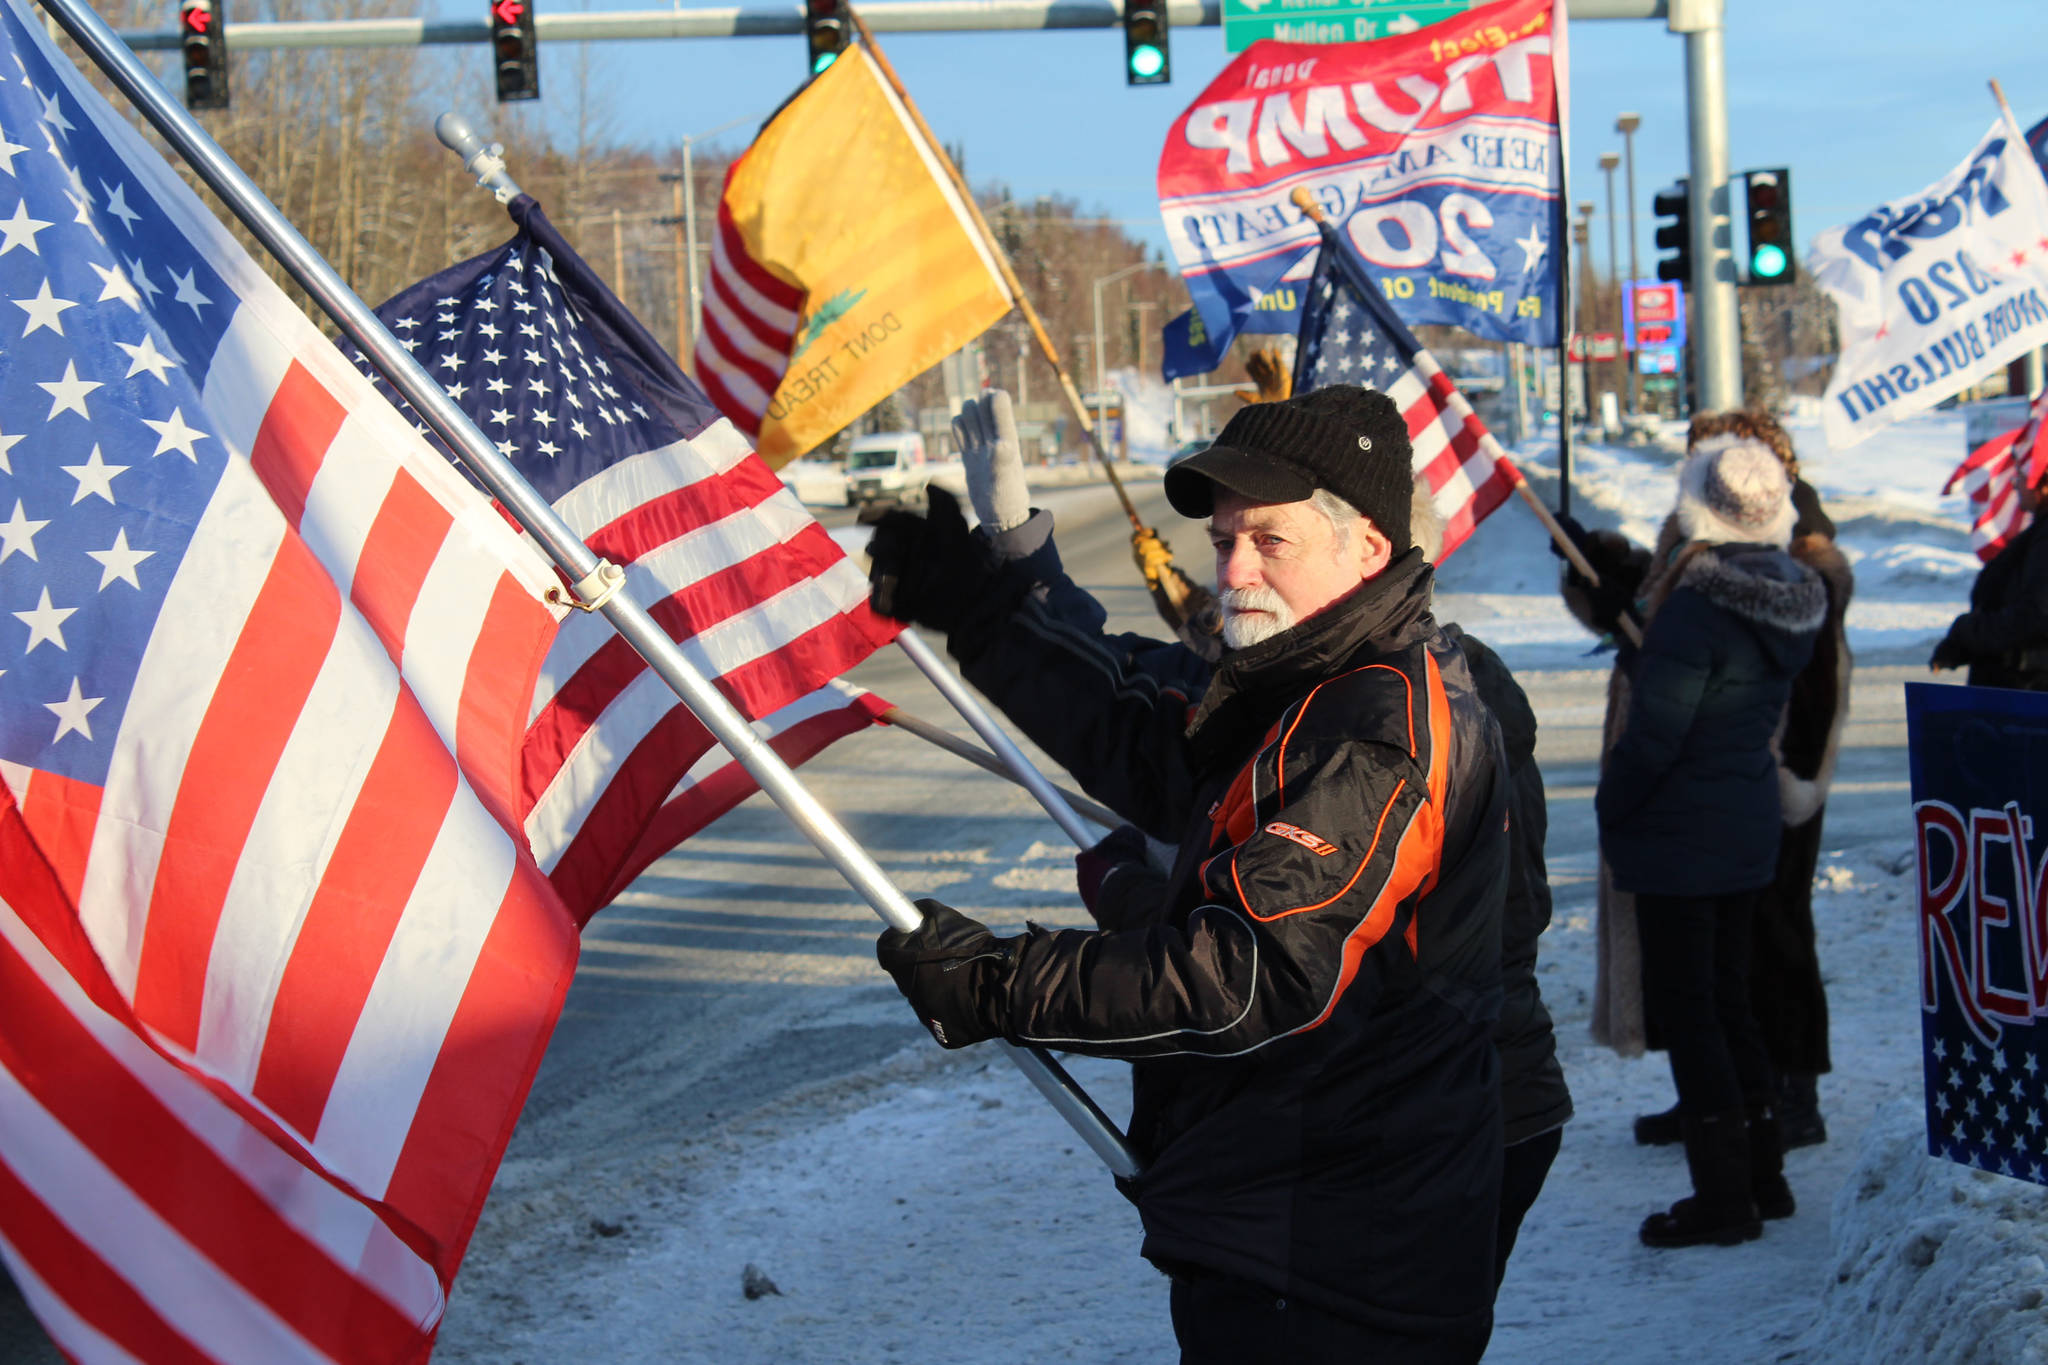 Ron Henry holds an American flag at the intersection of Kenai Spur and Sterling highways on Wednesday, Jan. 6 in Soldotna, Alaska. (Ashlyn O’Hara/Peninsula Clarion)